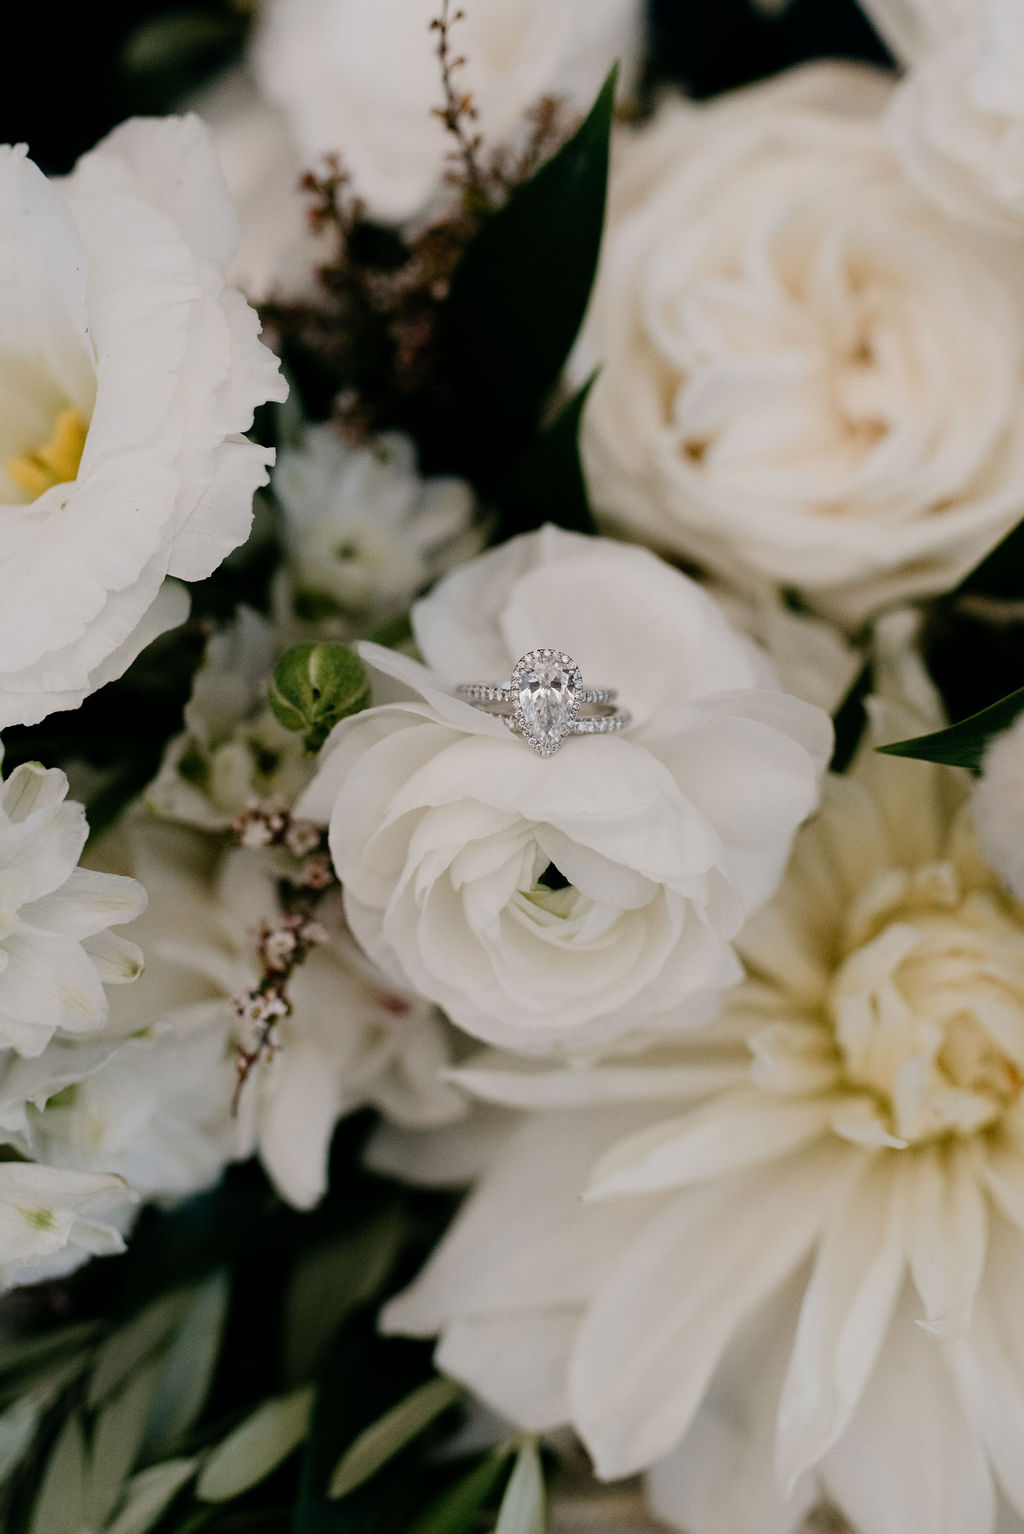 Gorgeous wedding rings in brides bouquet